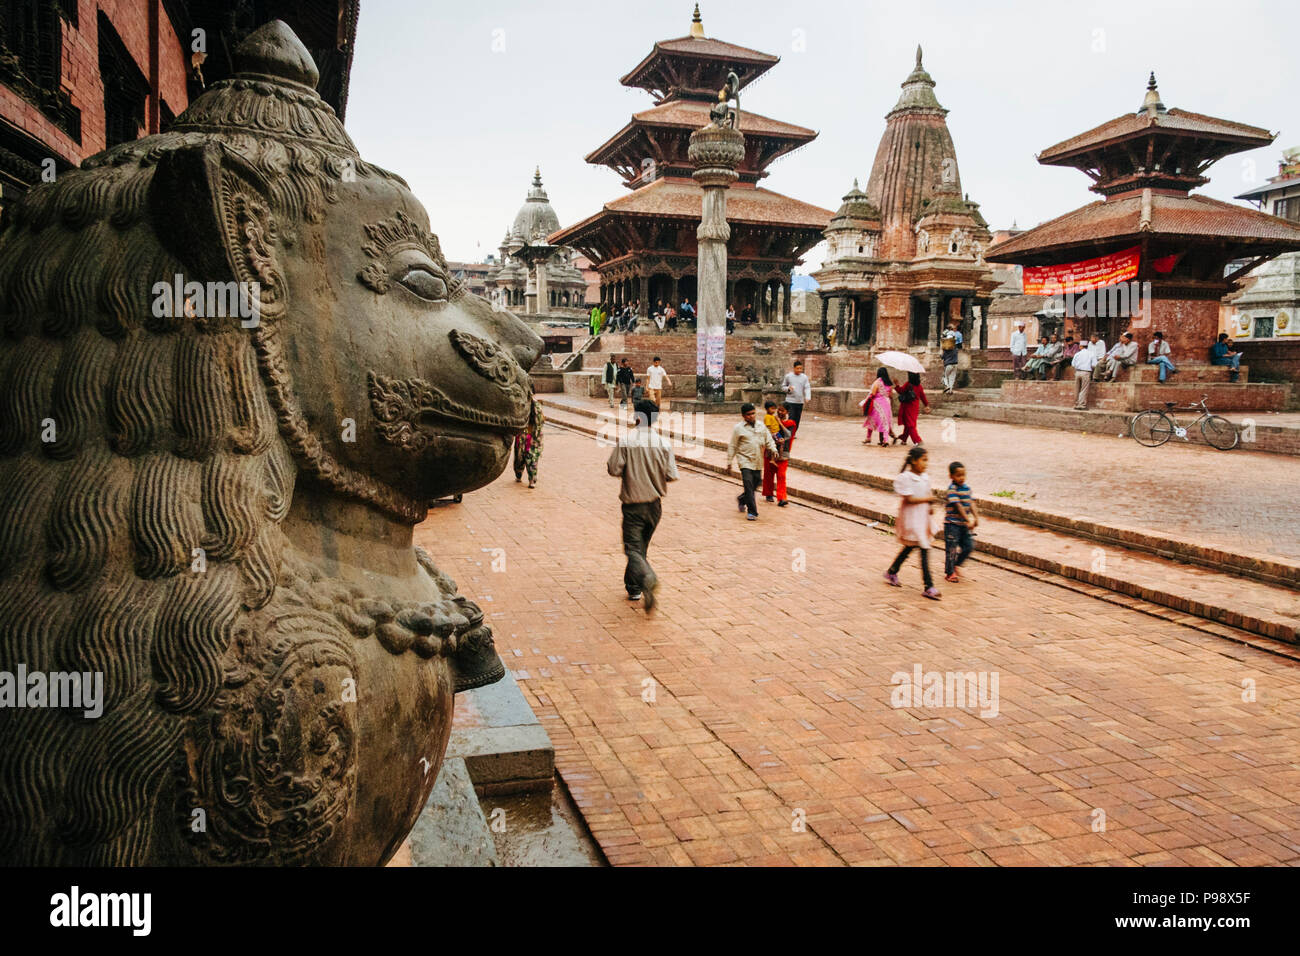 Lalitpur, Kathmandu Valley, Nepal : Passersby walk along the Unesco listed Patan Durbar square. A Royal Palace´s lion statue is seen in foreground and Stock Photo